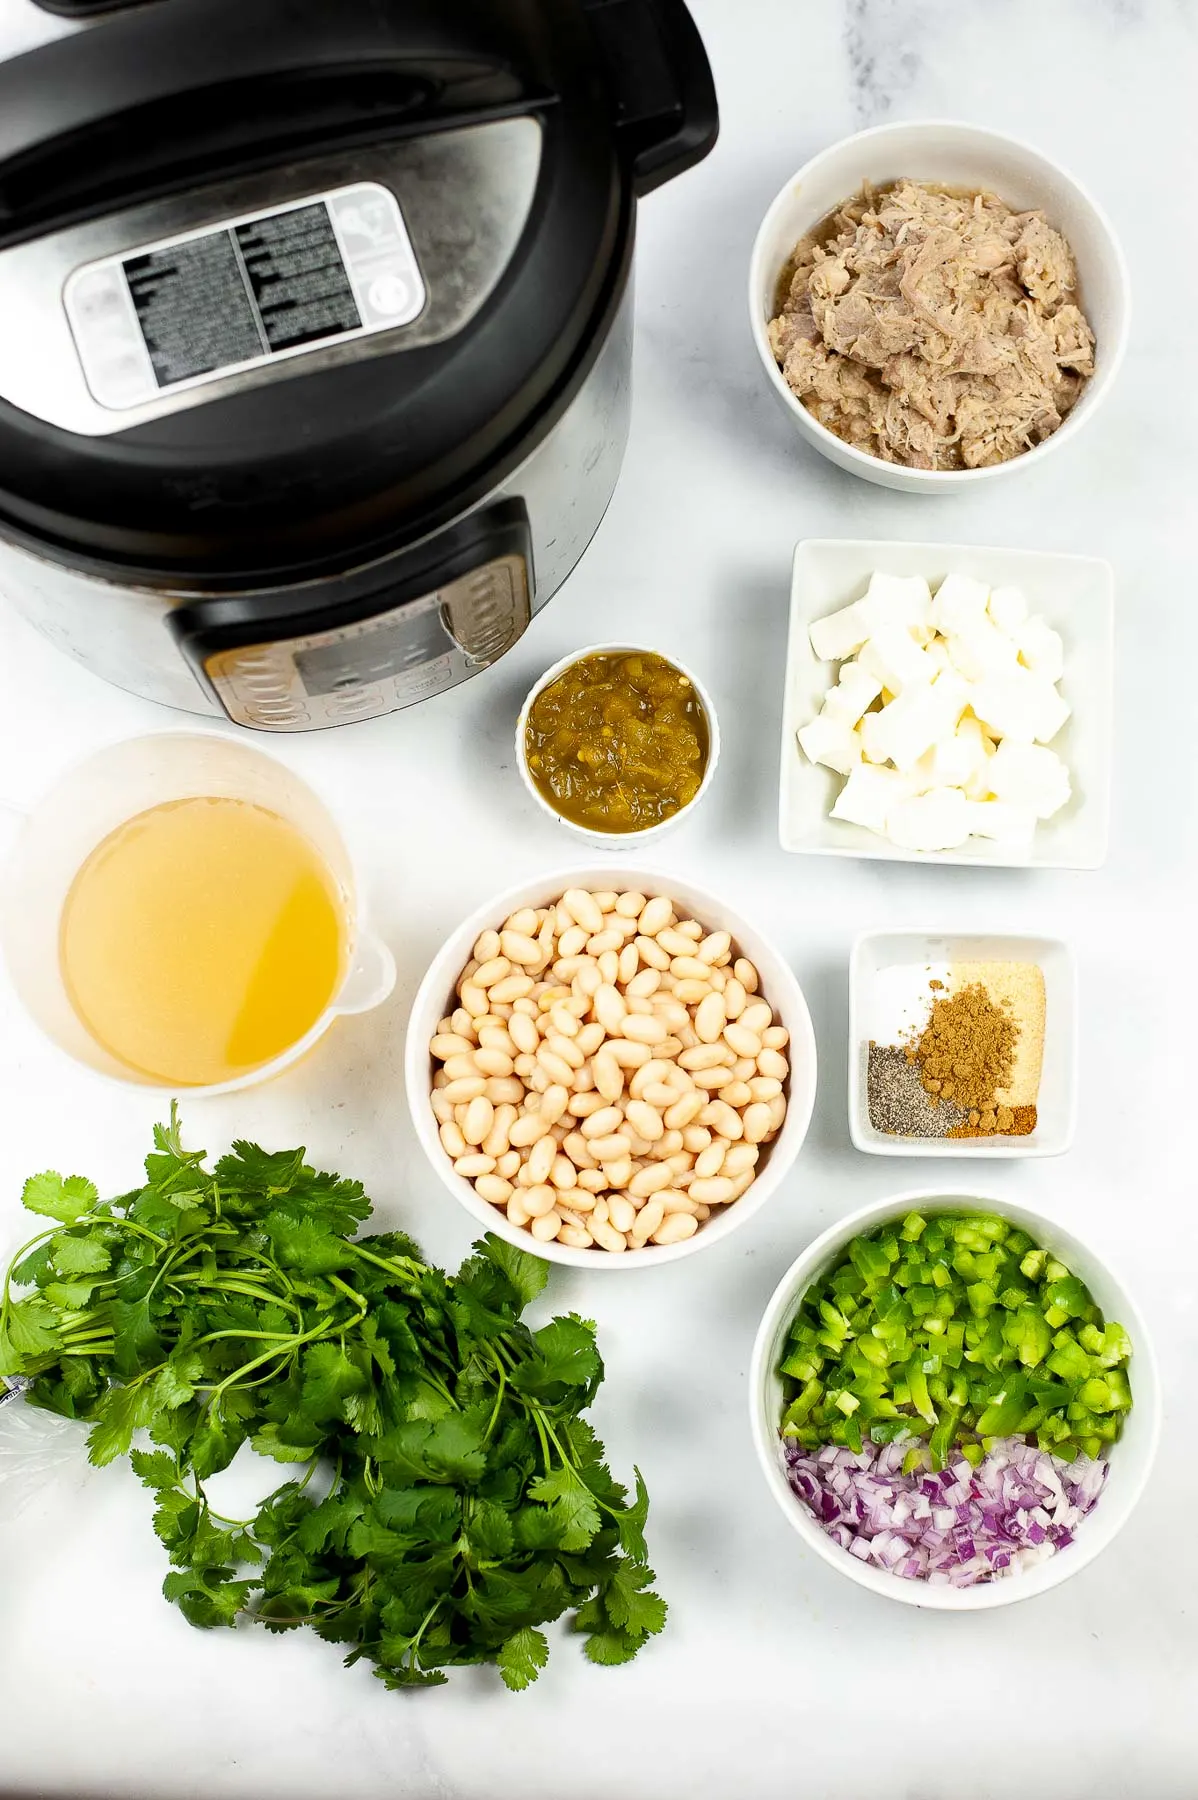 Ingredients to make white chicken chili in the Instant Pot